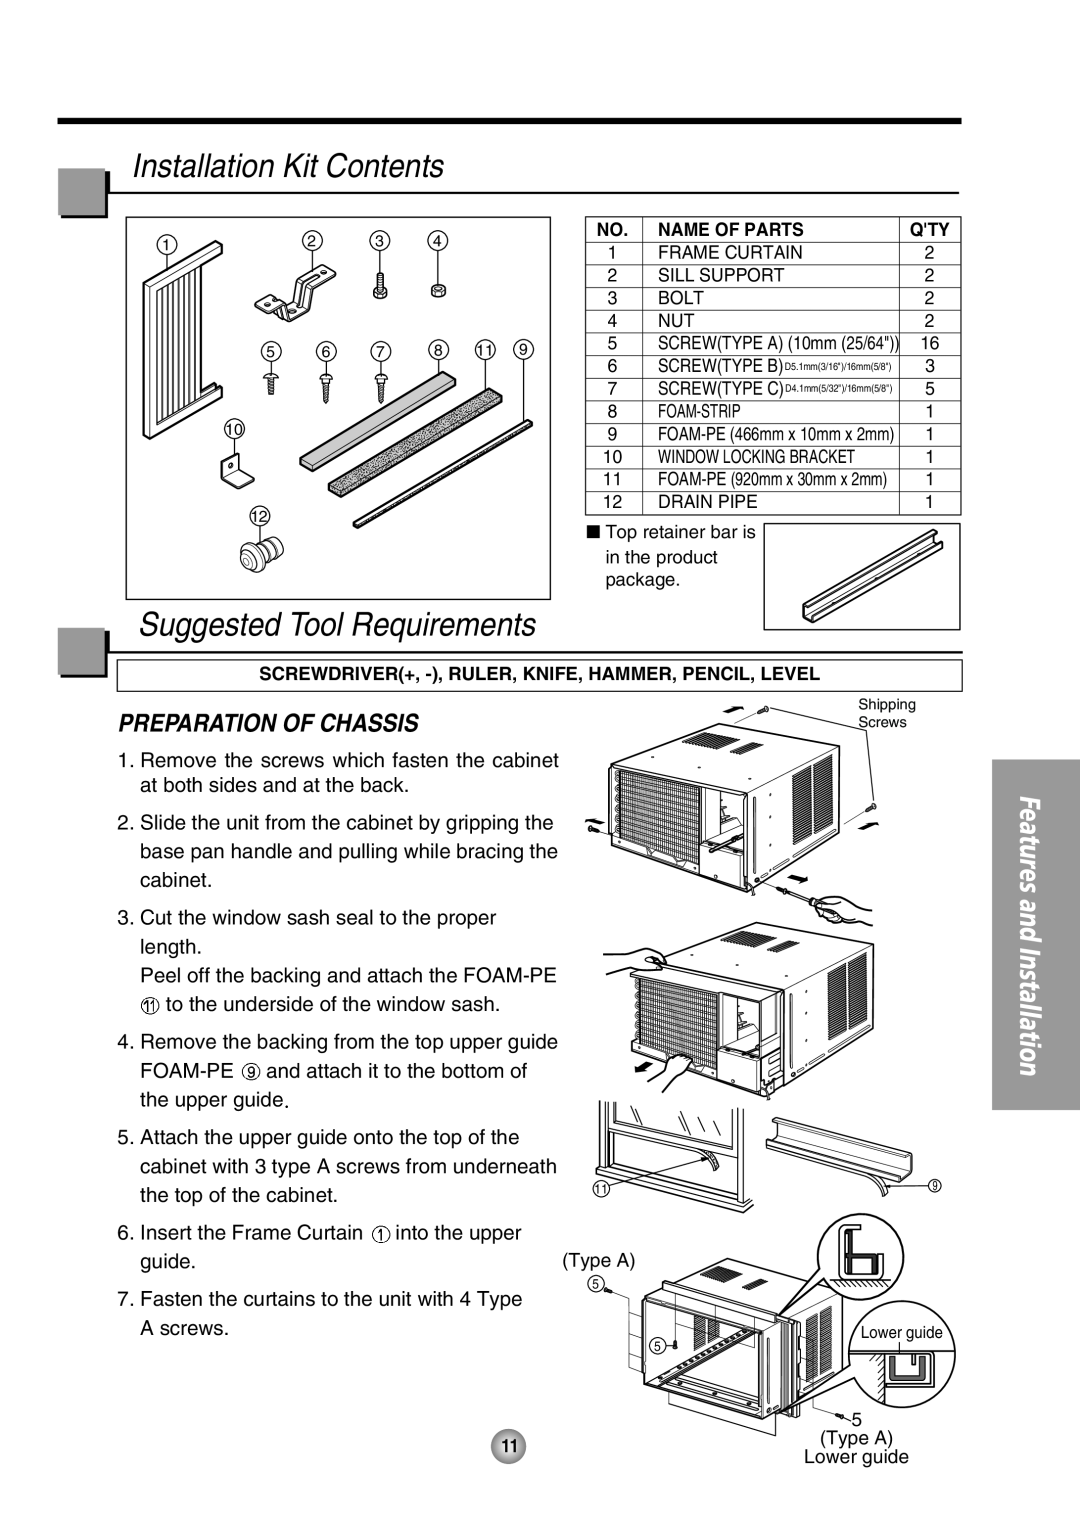 Panasonic CW-XC80HU manual Installation Kit Contents, Suggested Tool Requirements, Preparation Of Chassis 